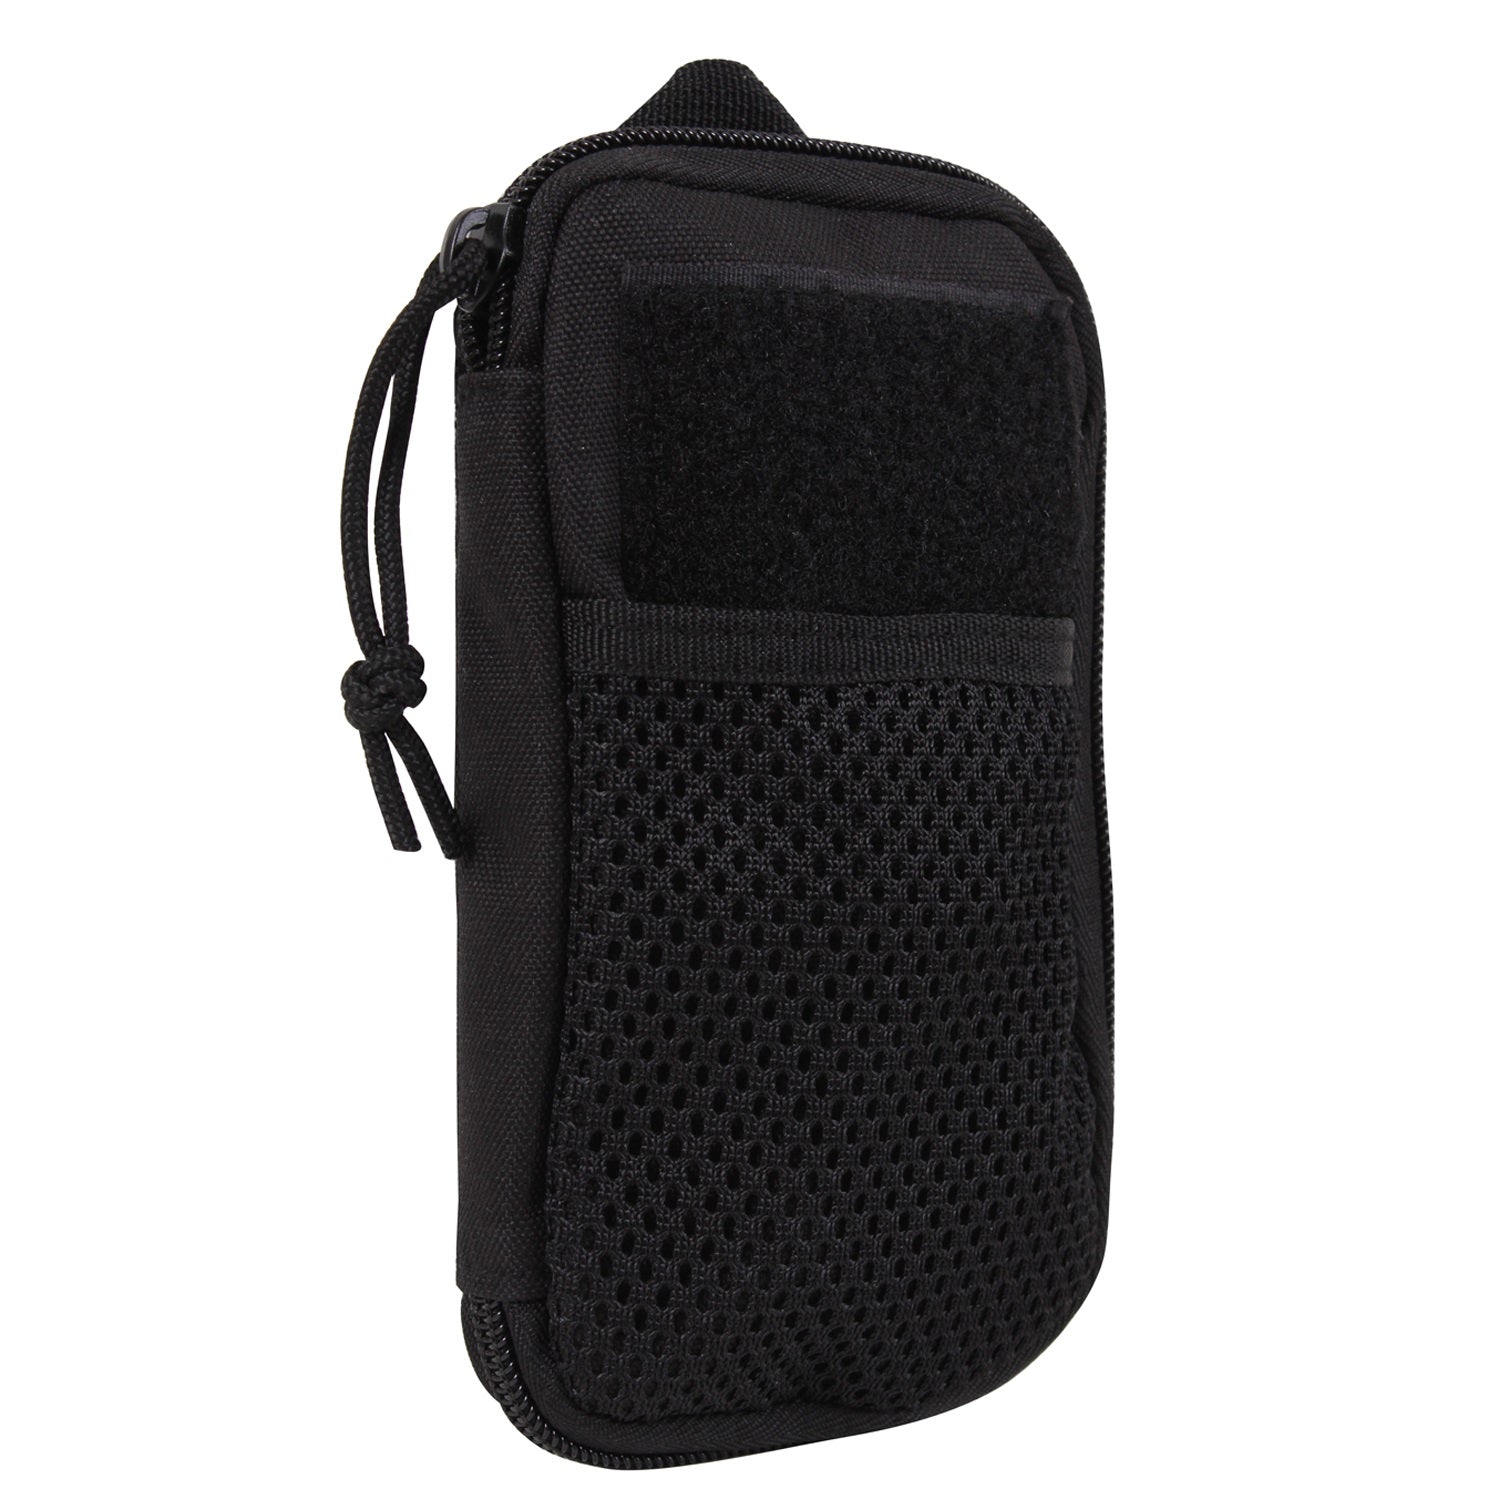 Rothco Tactical MOLLE EDC Wallet and Phone Pouch Black